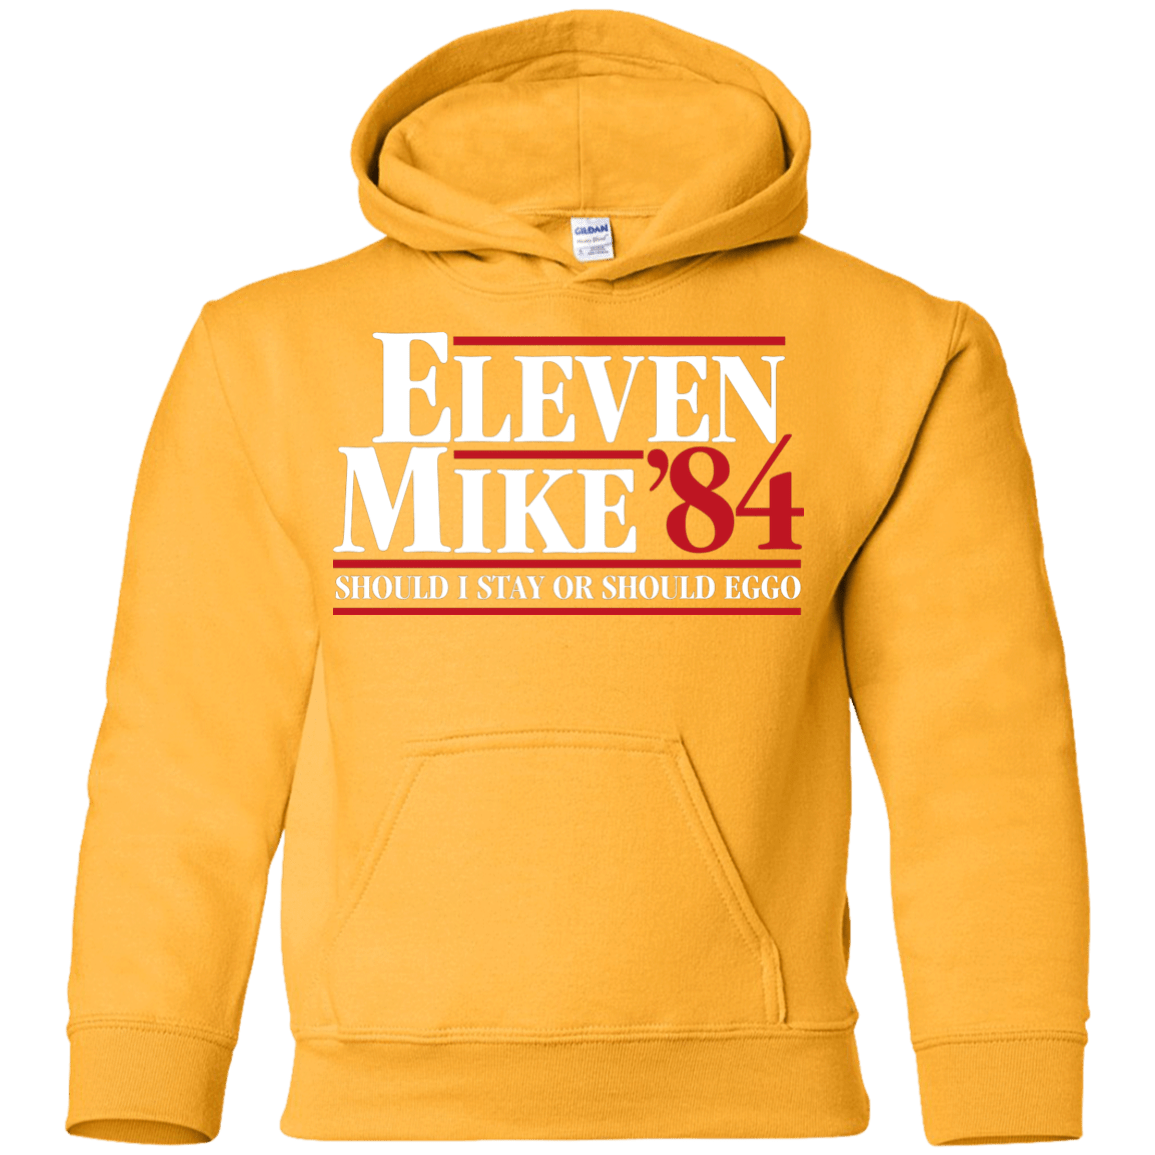 Sweatshirts Gold / YS Eleven Mike 84 - Should I Stay or Should Eggo Youth Hoodie